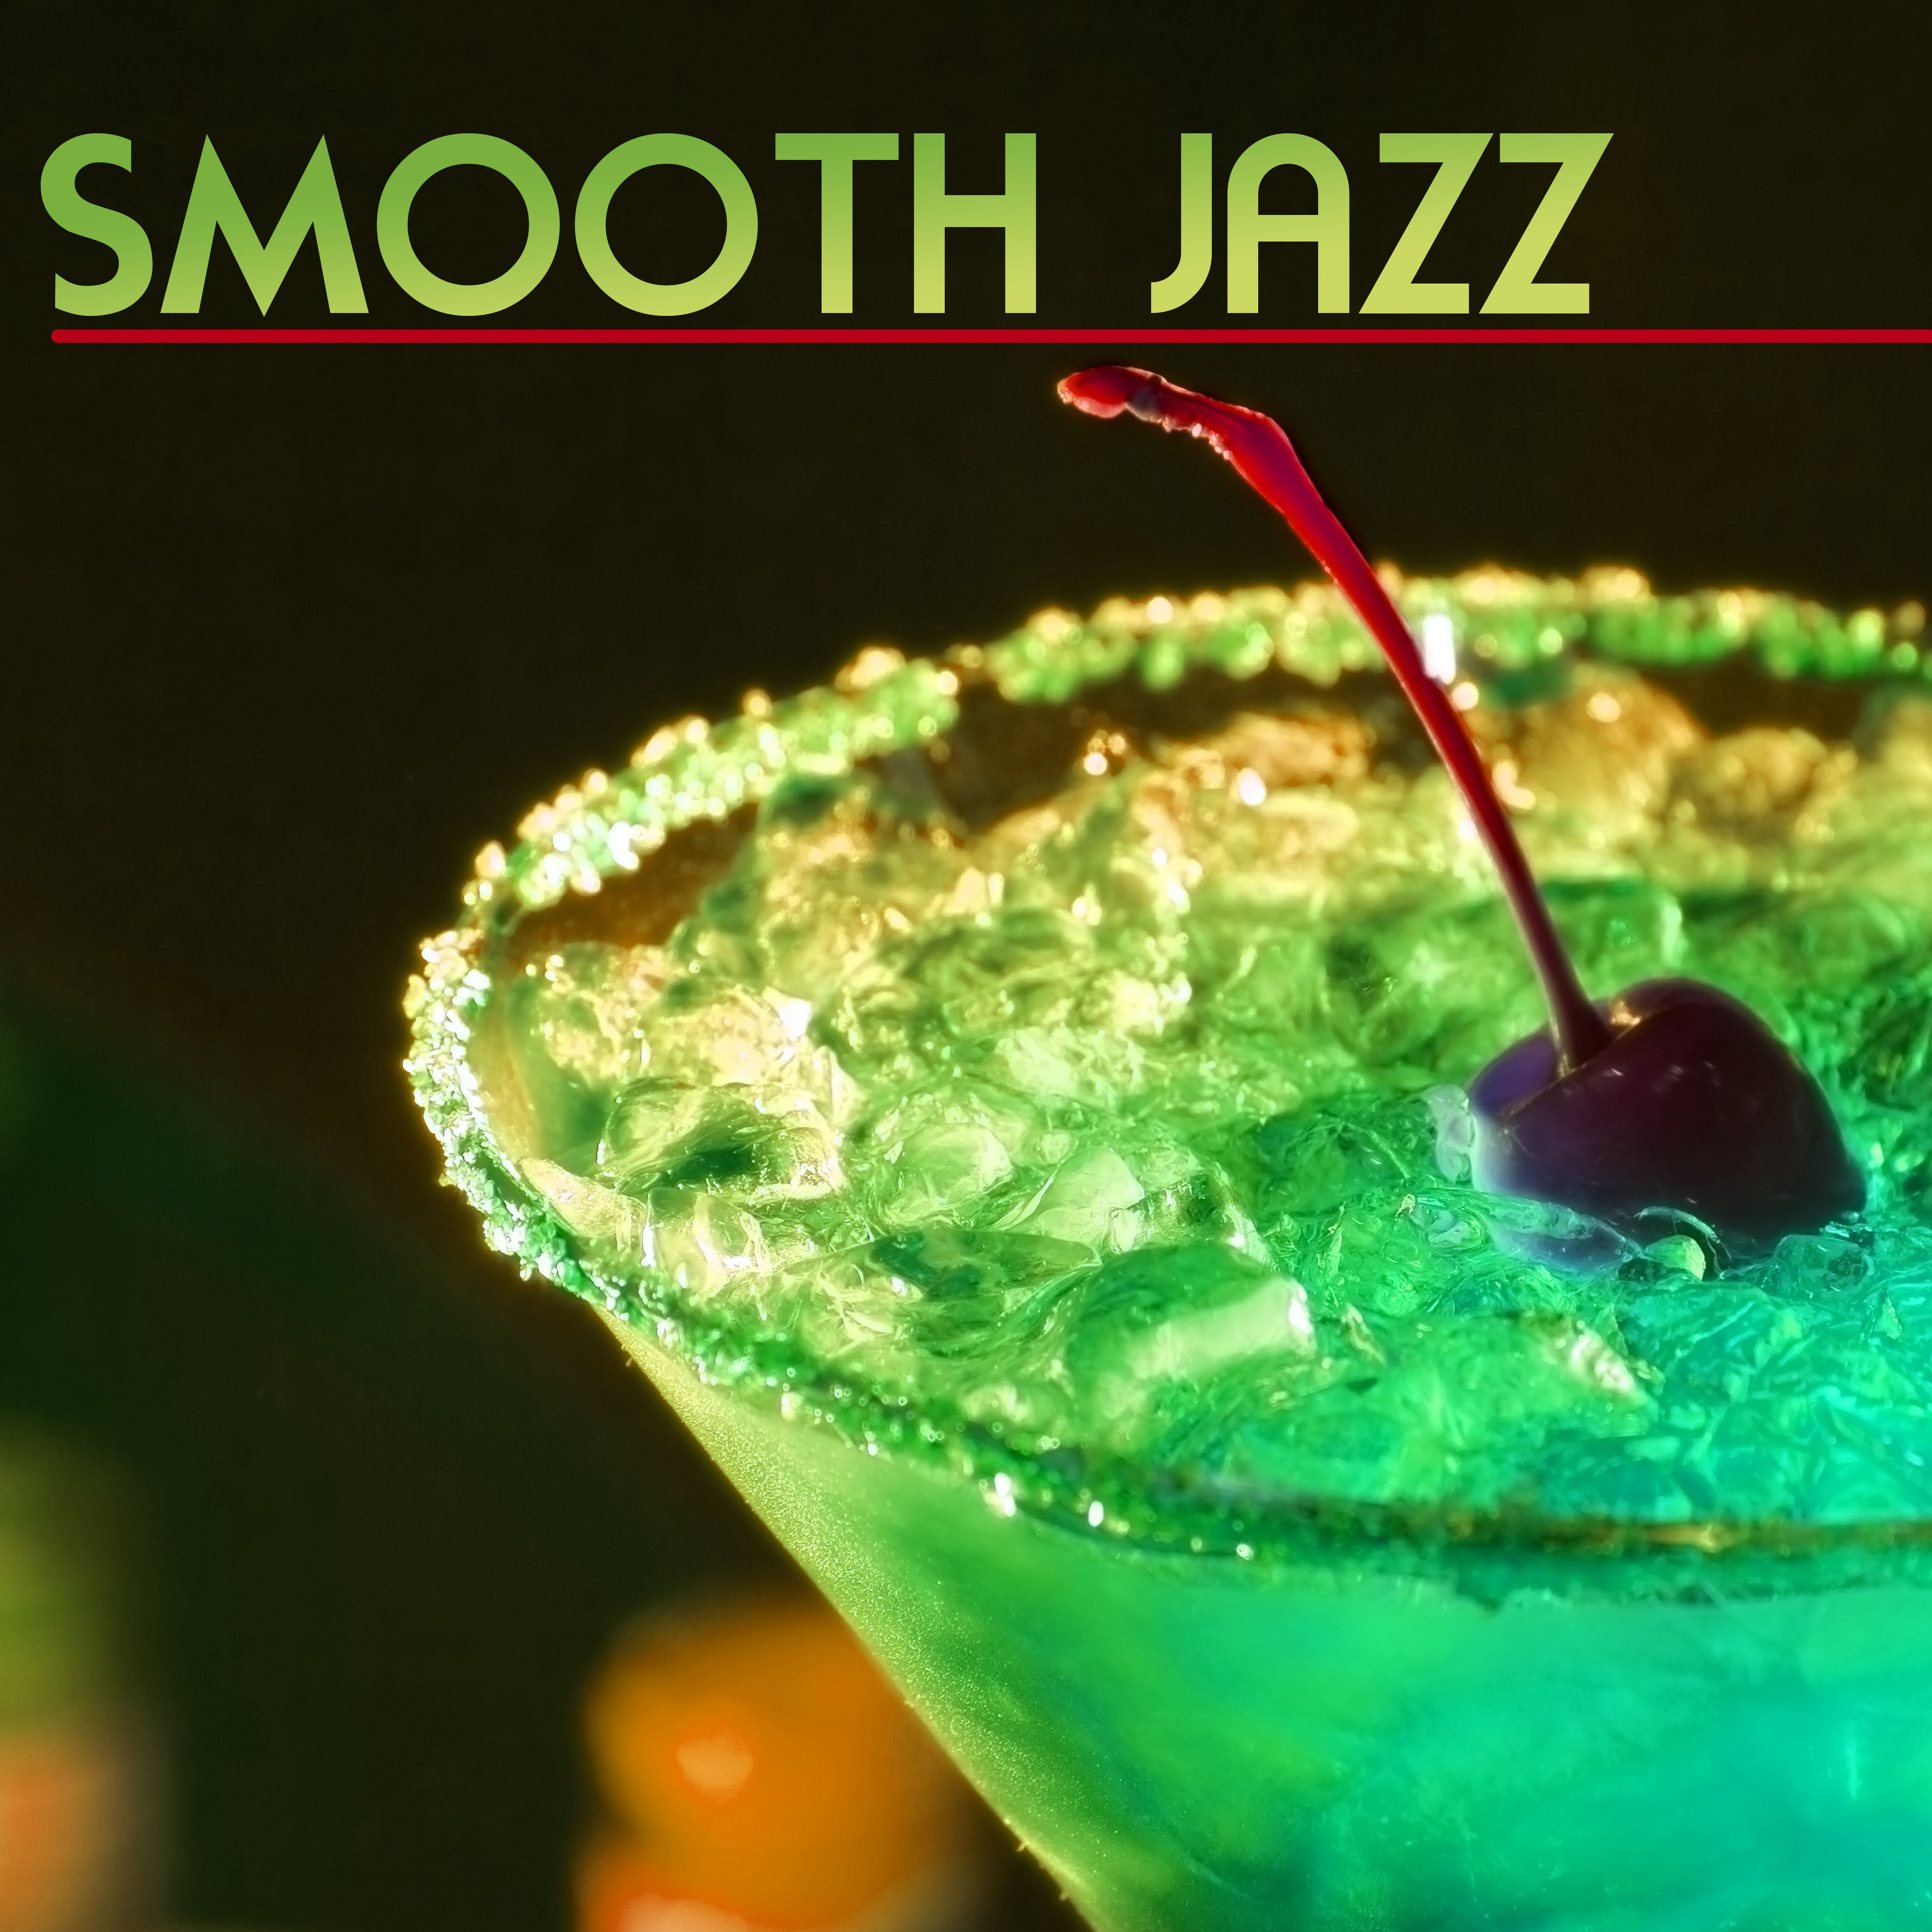 Smooth Jazz - Ambient Background Instrumental Jazz Music, Summer Nightlife Chillout Classics